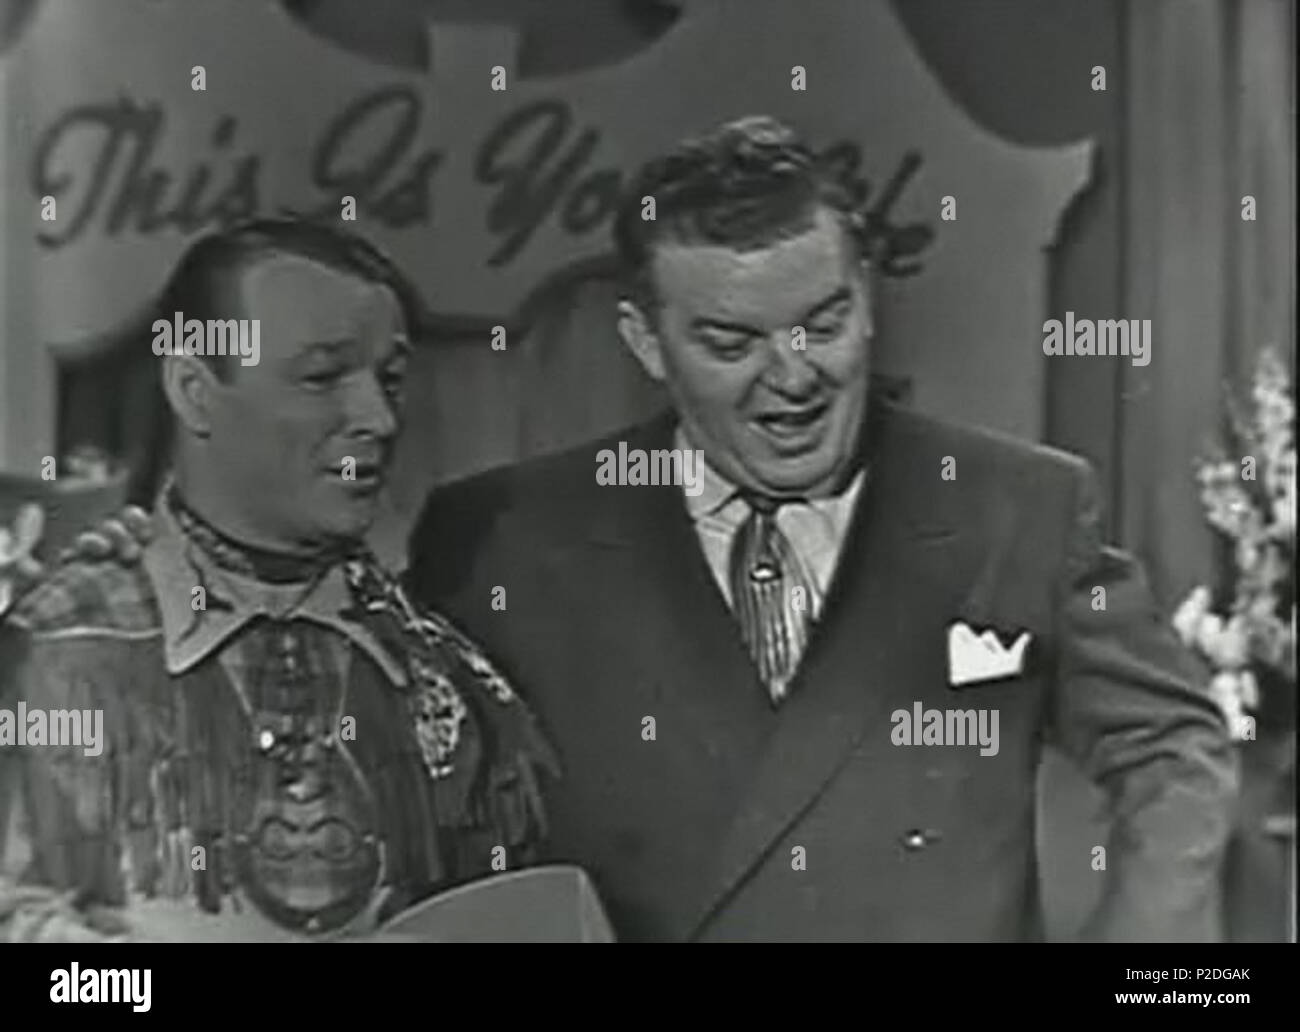 . English: Roy Rogers while appearing in the TV show This Is Your Life Deutsch: Roy Rogers während eines Auftrittes in der Fernsehshow This Is Your Life . Unknown date. Unknown 49 RoyRogers2 Stock Photo